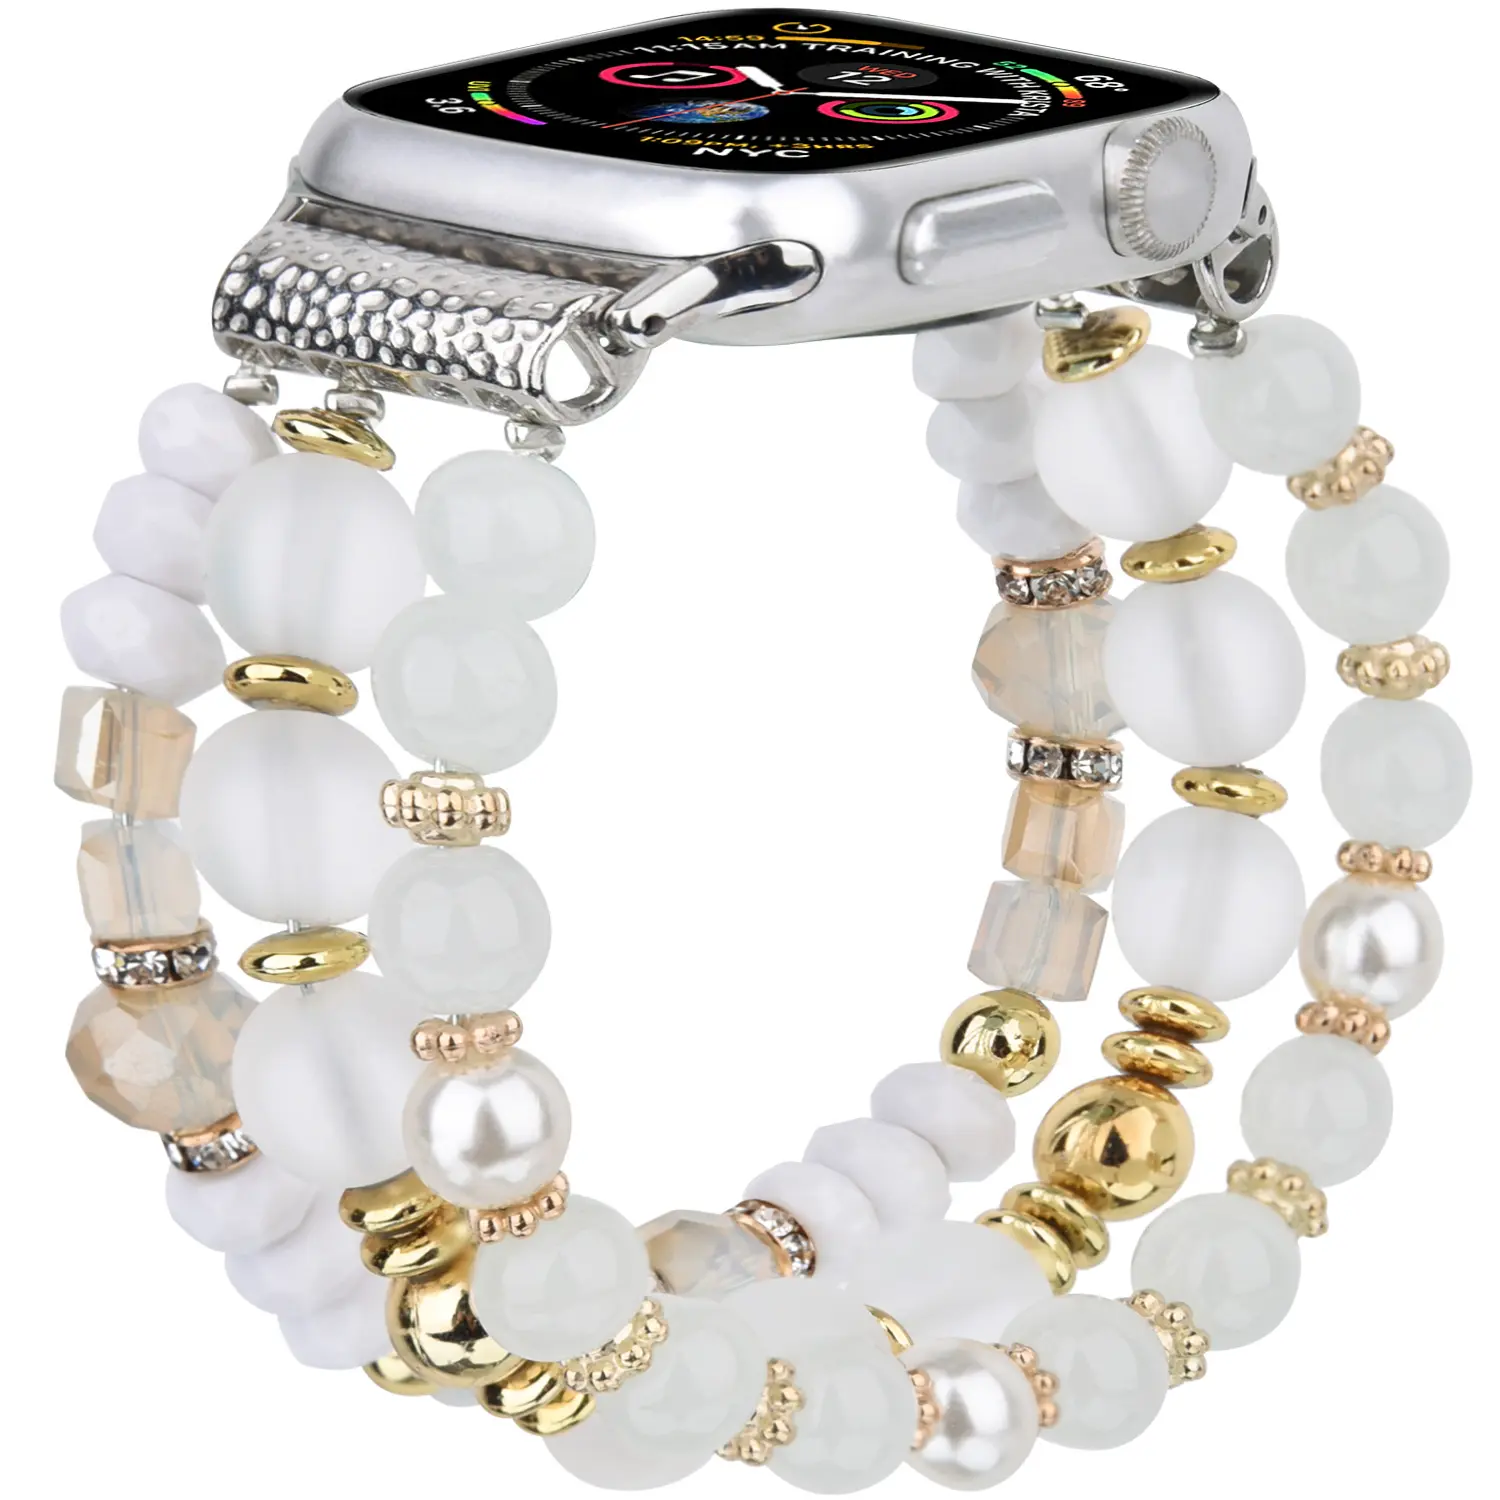 Beads Watch Band for iWatch, Fashion Ladies Pearl Beads Watch Straps for Apple Watch 38mm 42mm, Watch Bracelet for iPhone Watch